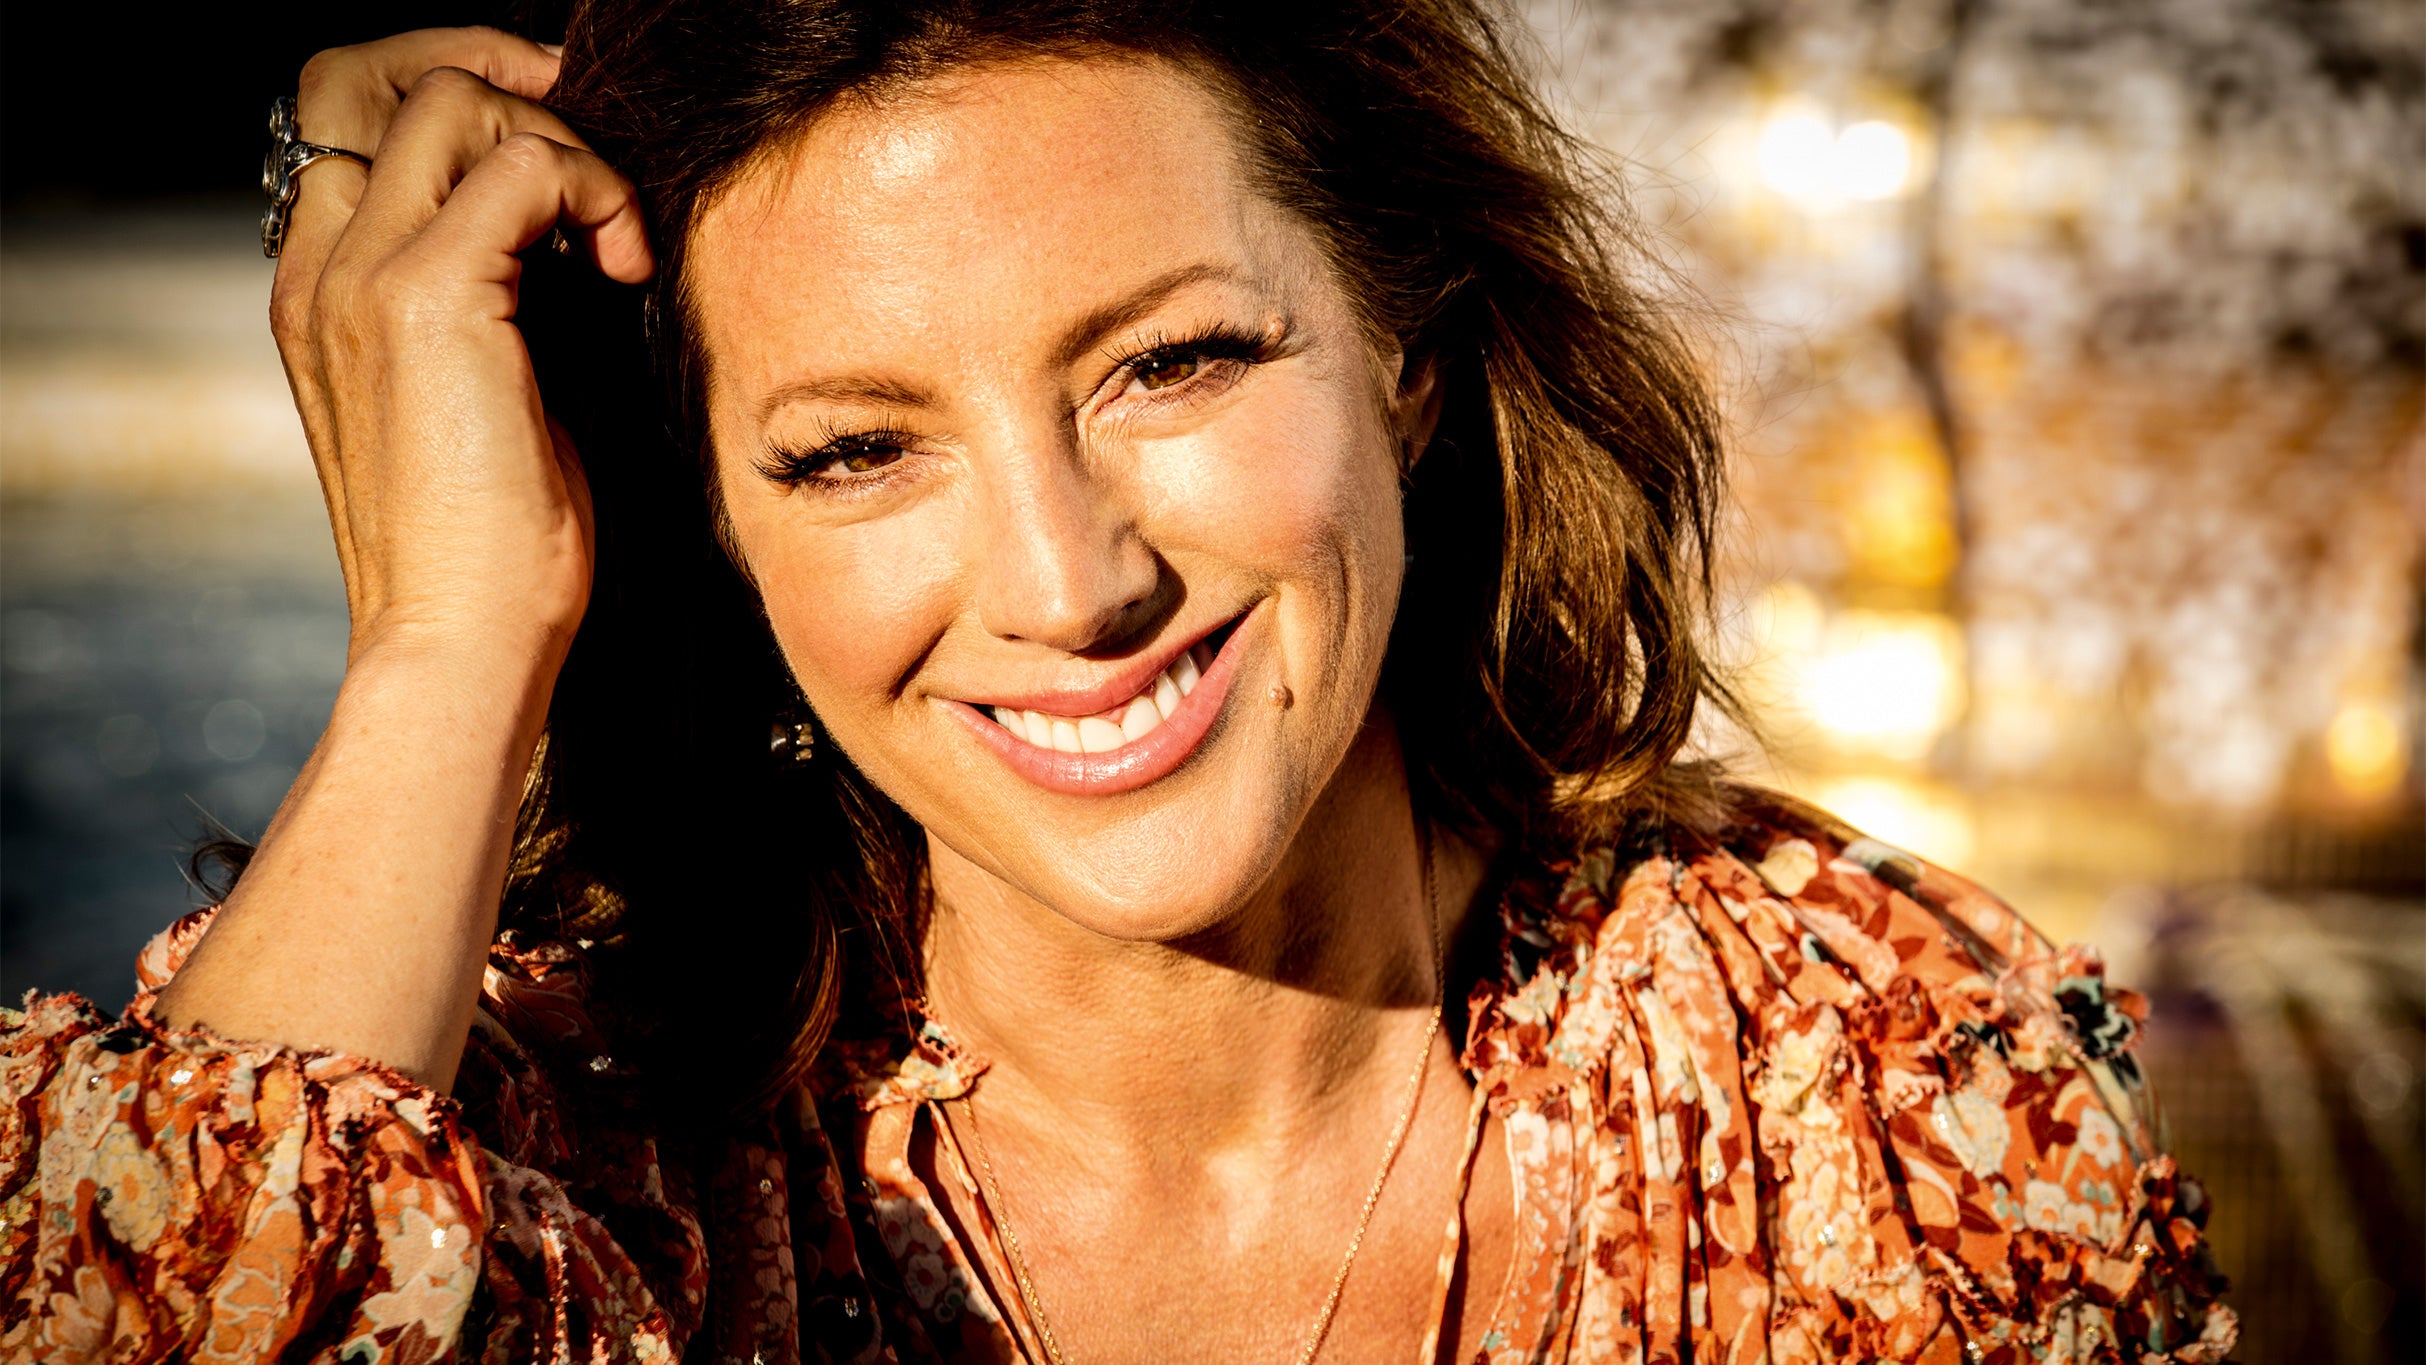 Sarah McLachlan - Fumbling Towards Ecstasy 30th Anniversary Tour presale code for your tickets in New York